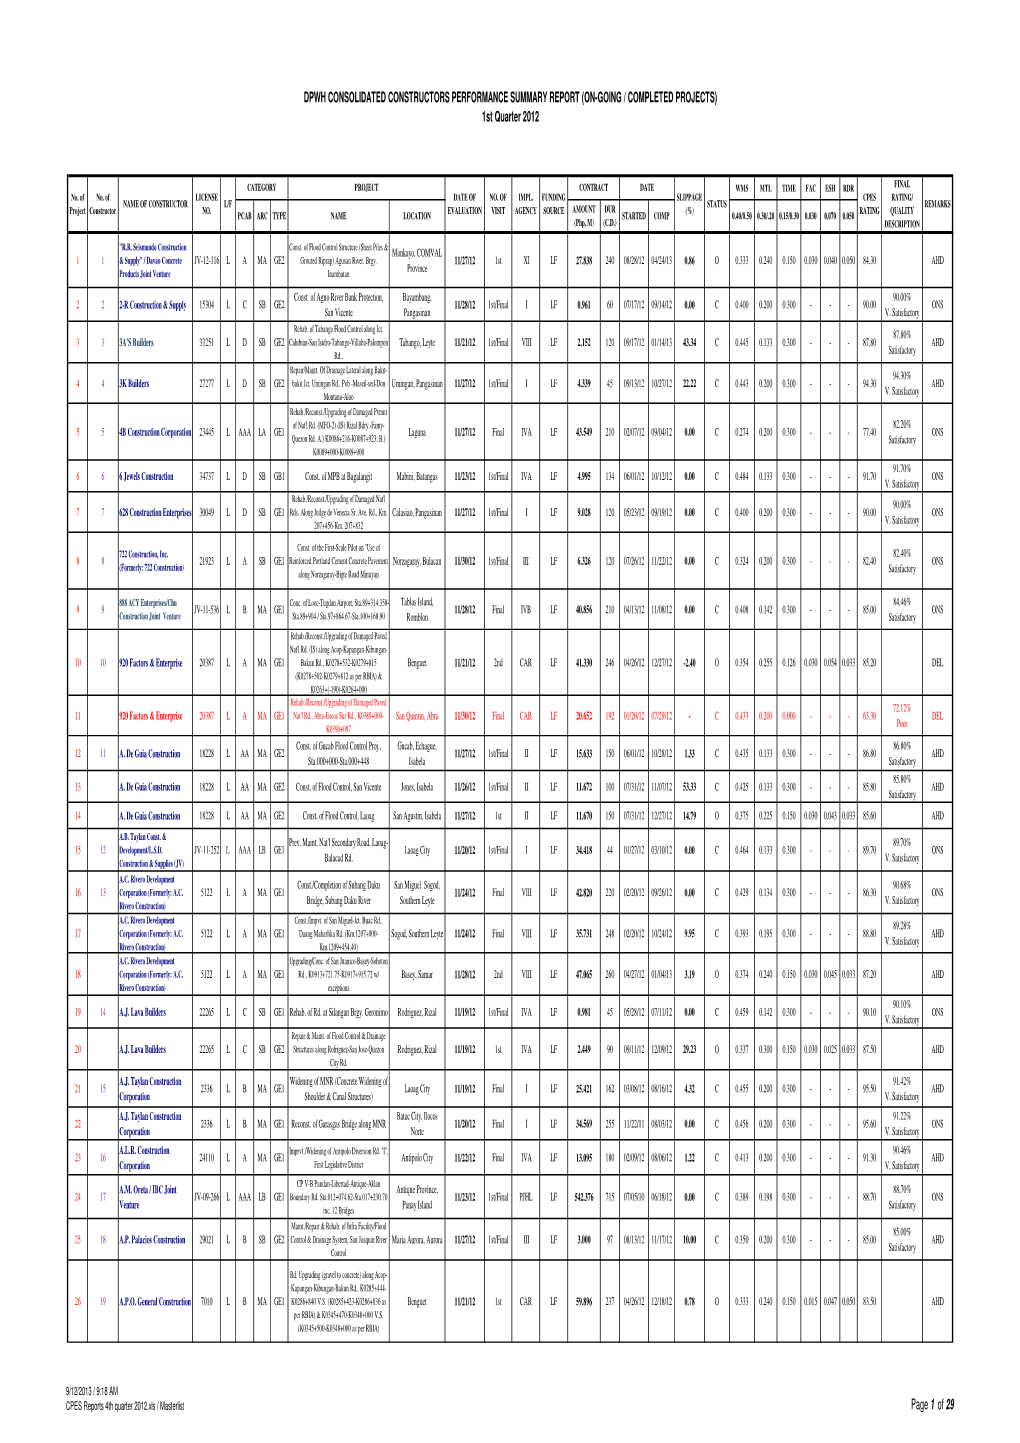 CPES Reports 4Th Quarter 2012.Xls / Masterlist Page 1 of 29 DPWH CONSOLIDATED CONSTRUCTORS PERFORMANCE SUMMARY REPORT (ON-GOING / COMPLETED PROJECTS) 1St Quarter 2012